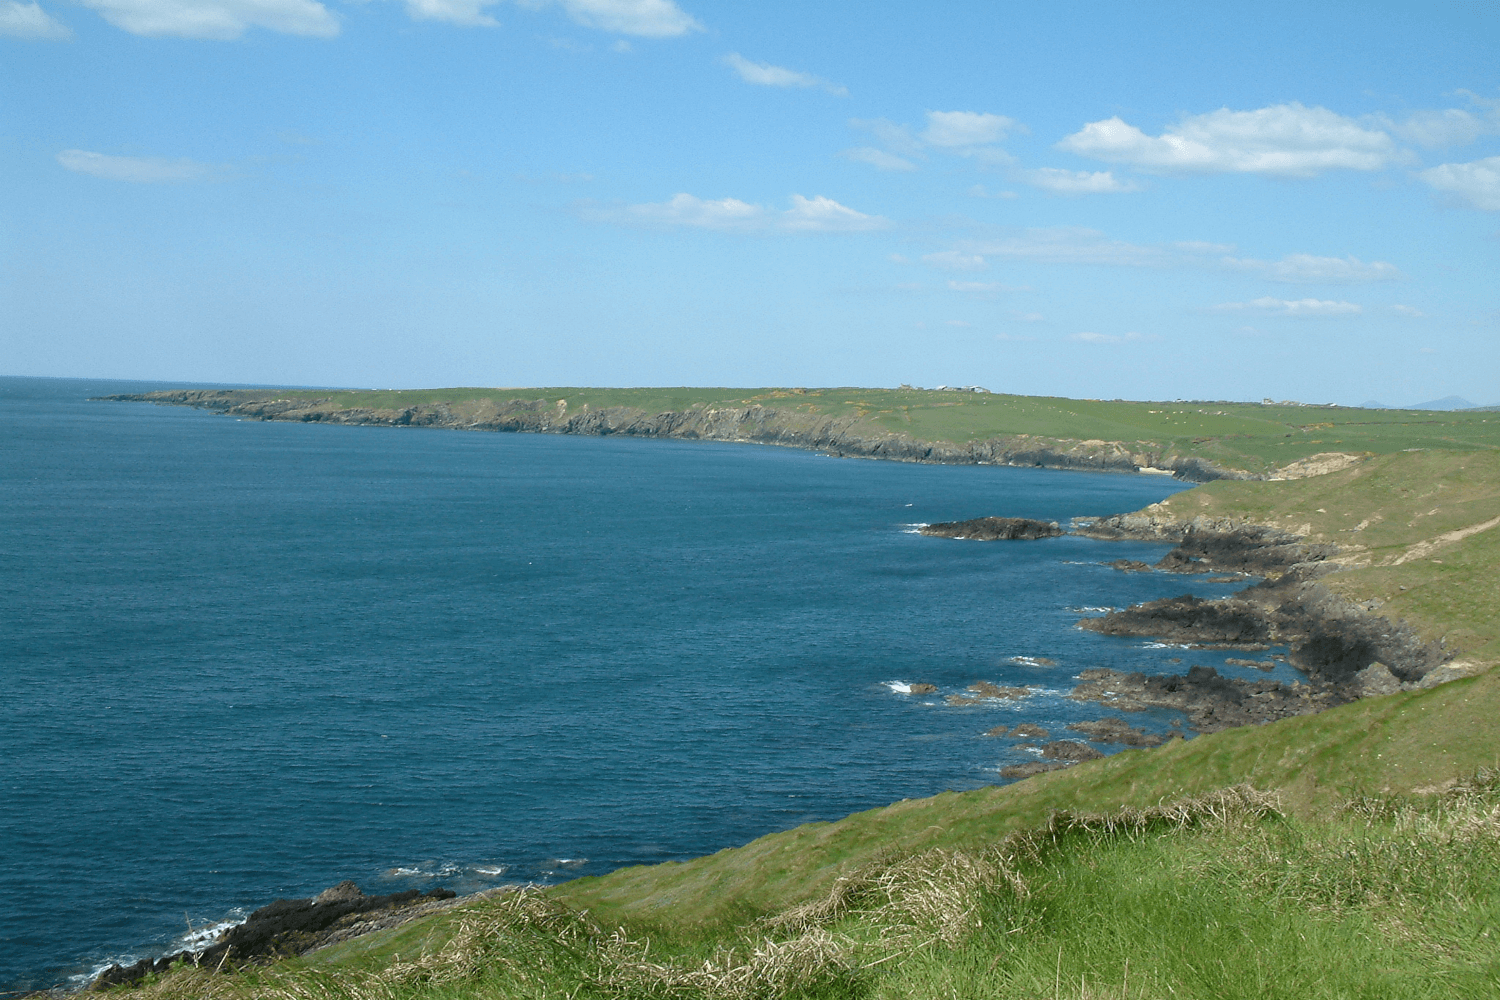 A view of the coastal to Porth Oer Porthor Whistling Sands